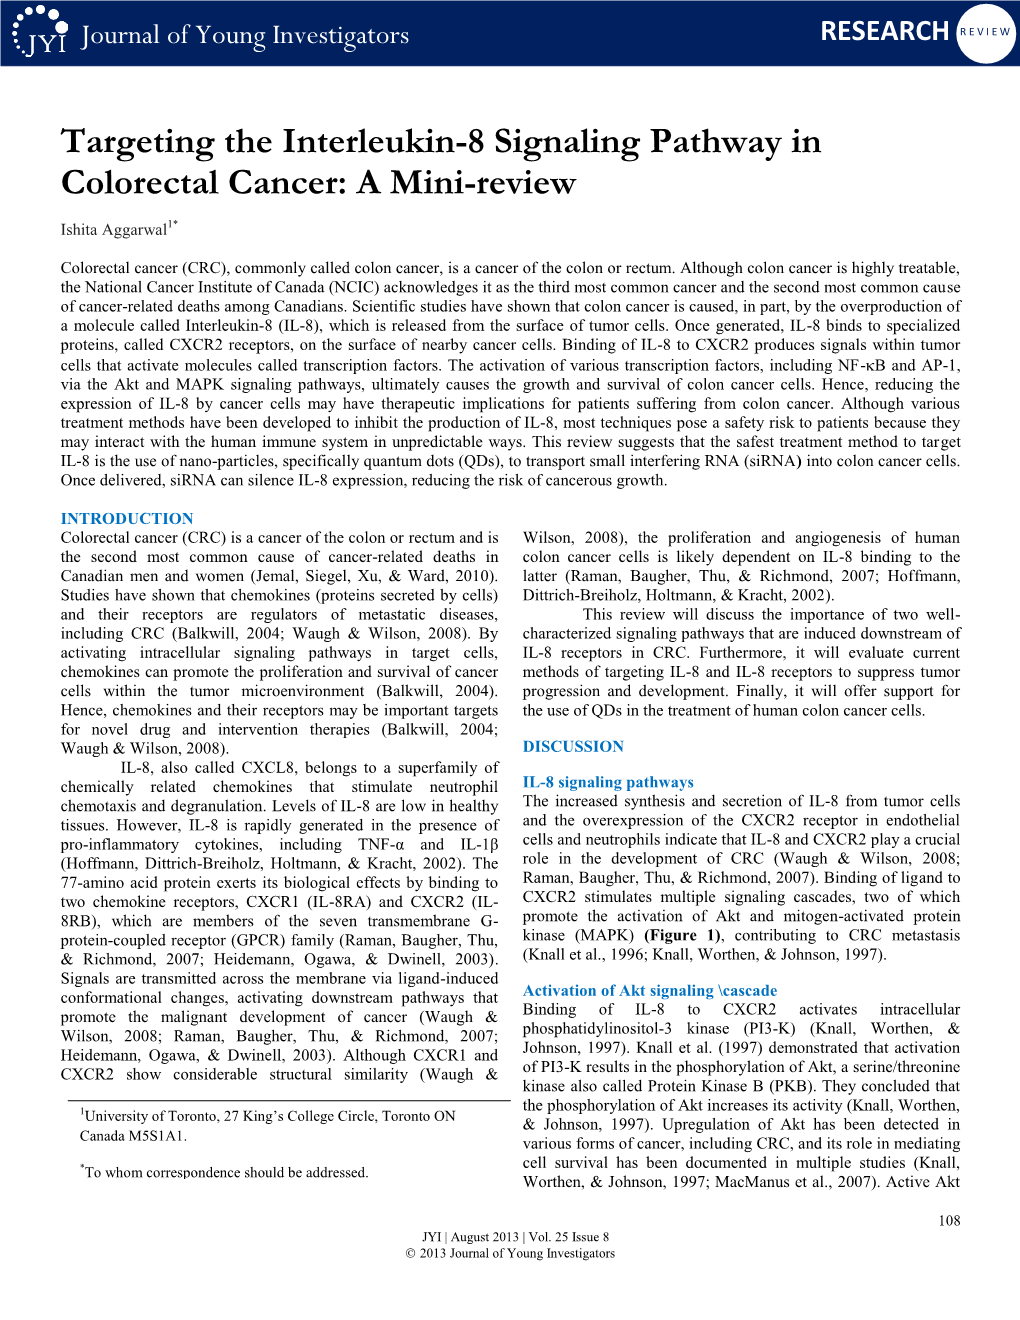 Targeting the Interleukin-8 Signaling Pathway in Colorectal Cancer: a Mini-Review